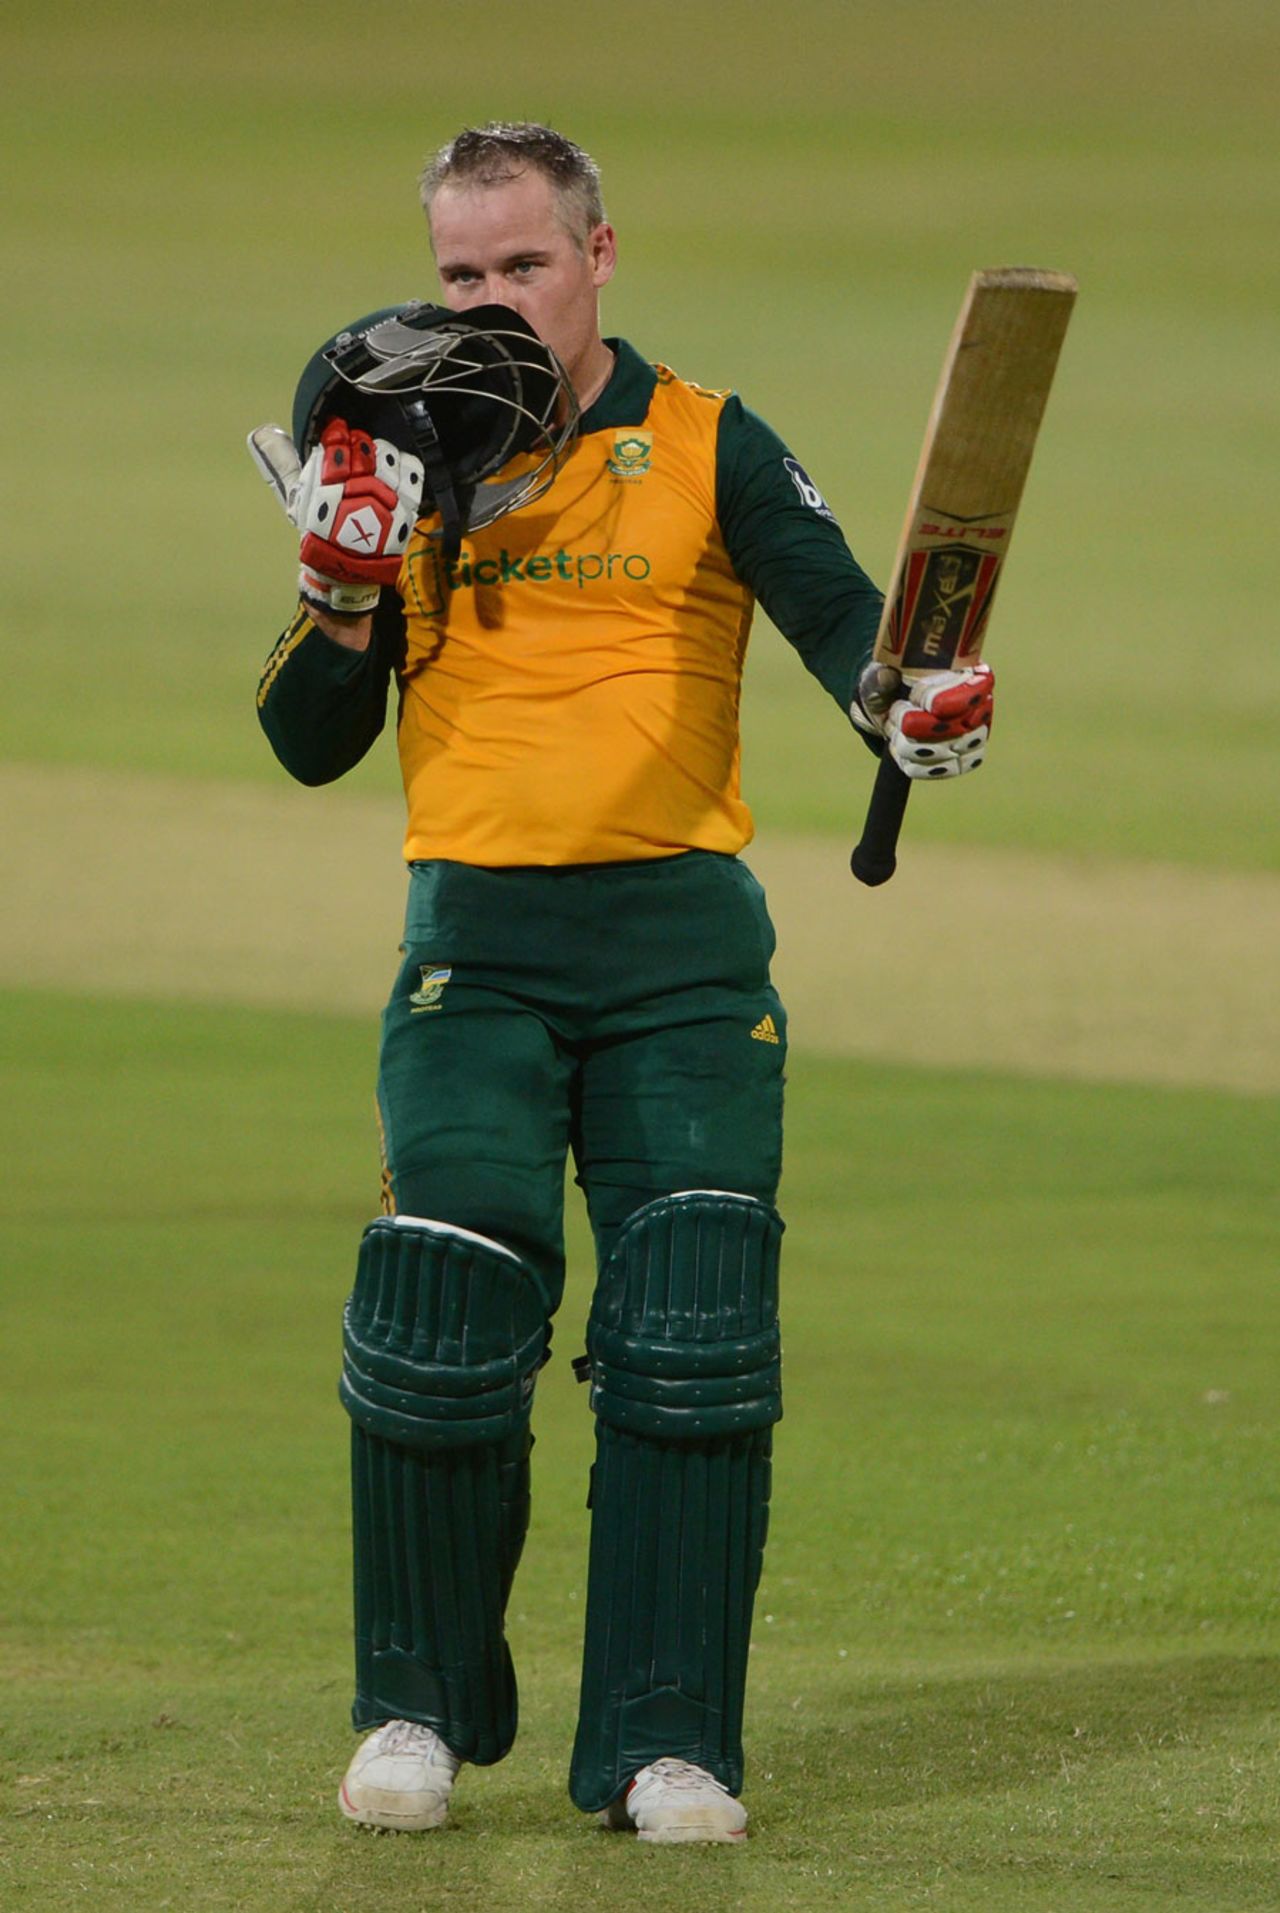 Morne van Wyk made his maiden international century, South Africa v West Indies, 3rd T20, Durban, January 14. 2015